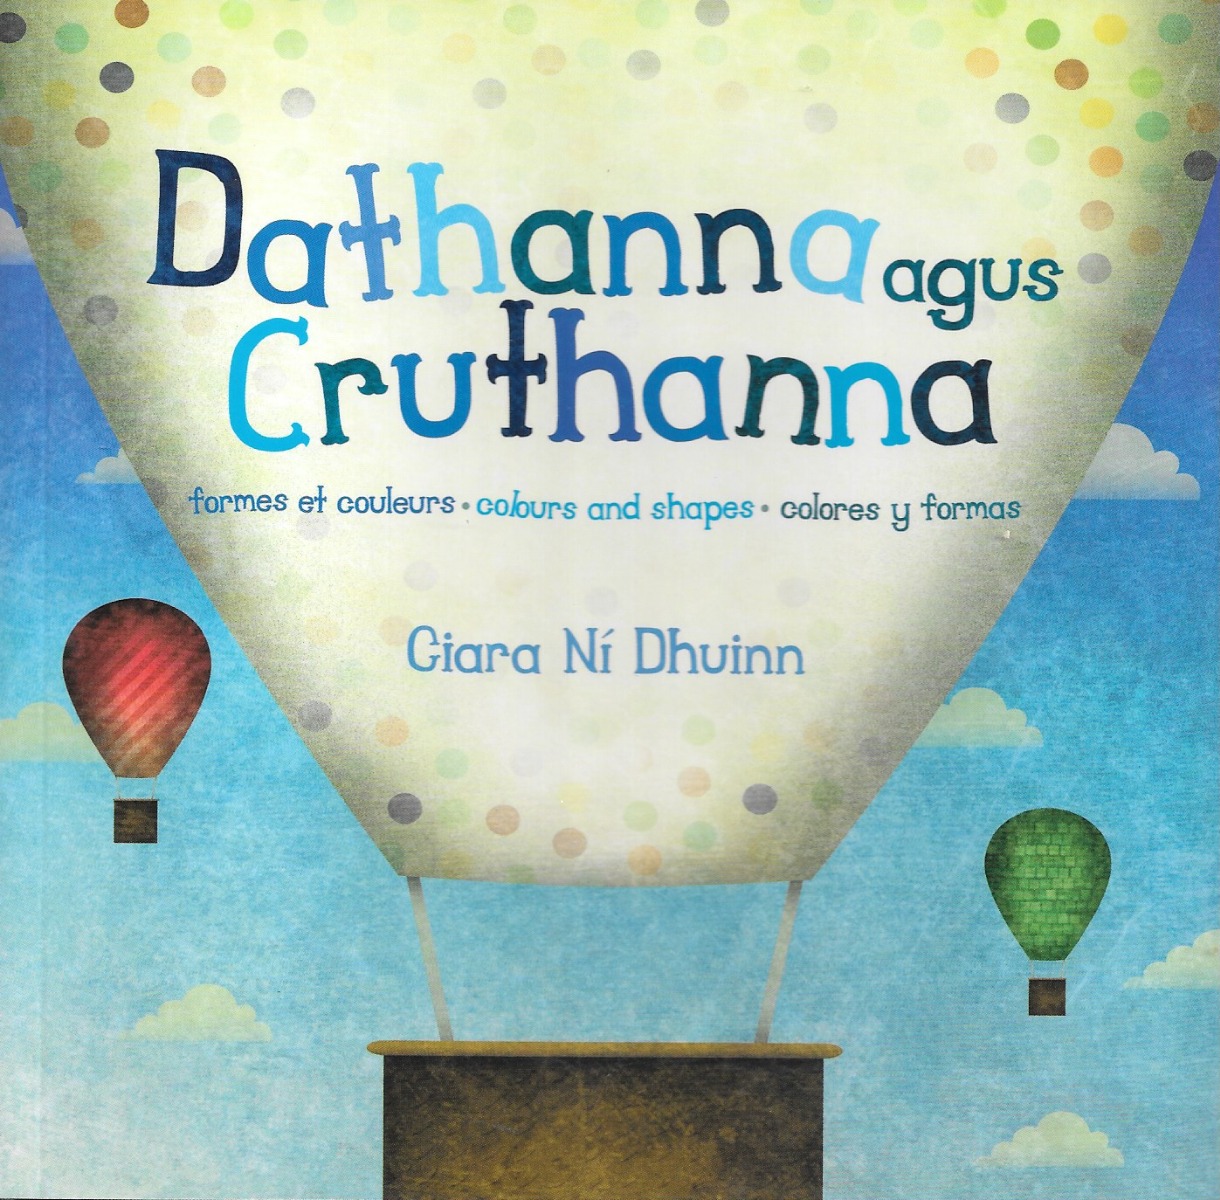 Dathanna agus Cruthanna (formes et couleurs, colours and shapes, colores y formas)